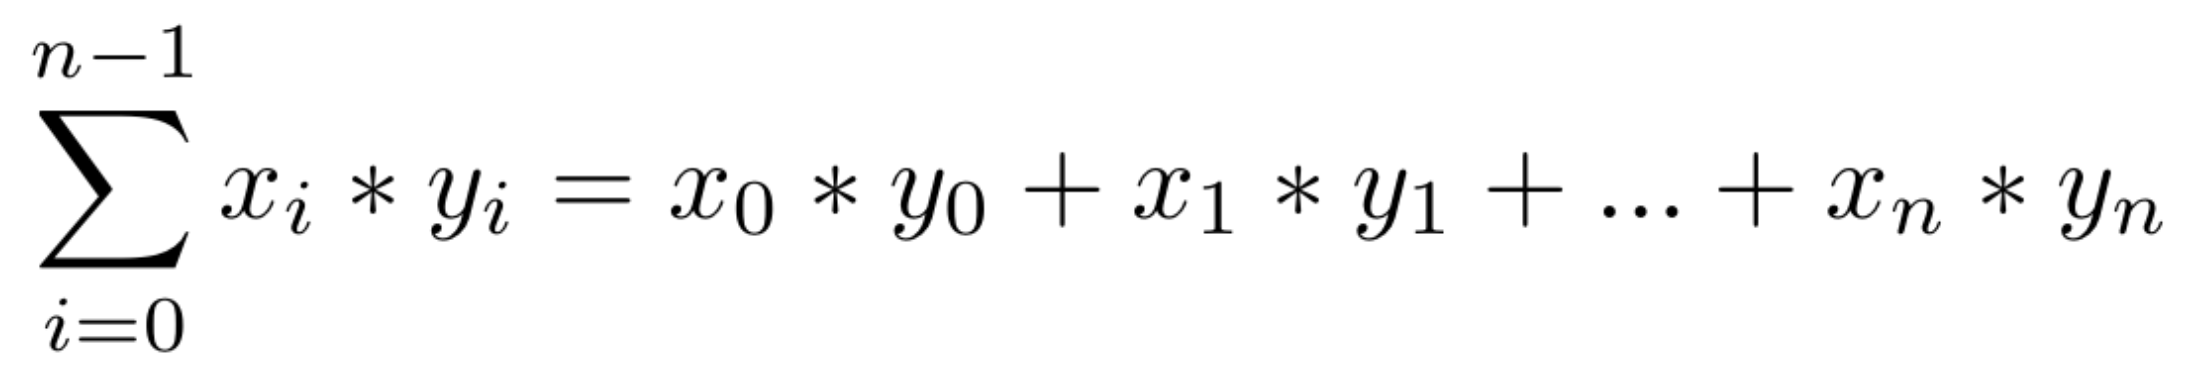 Equation from the scalar product of two vectors.